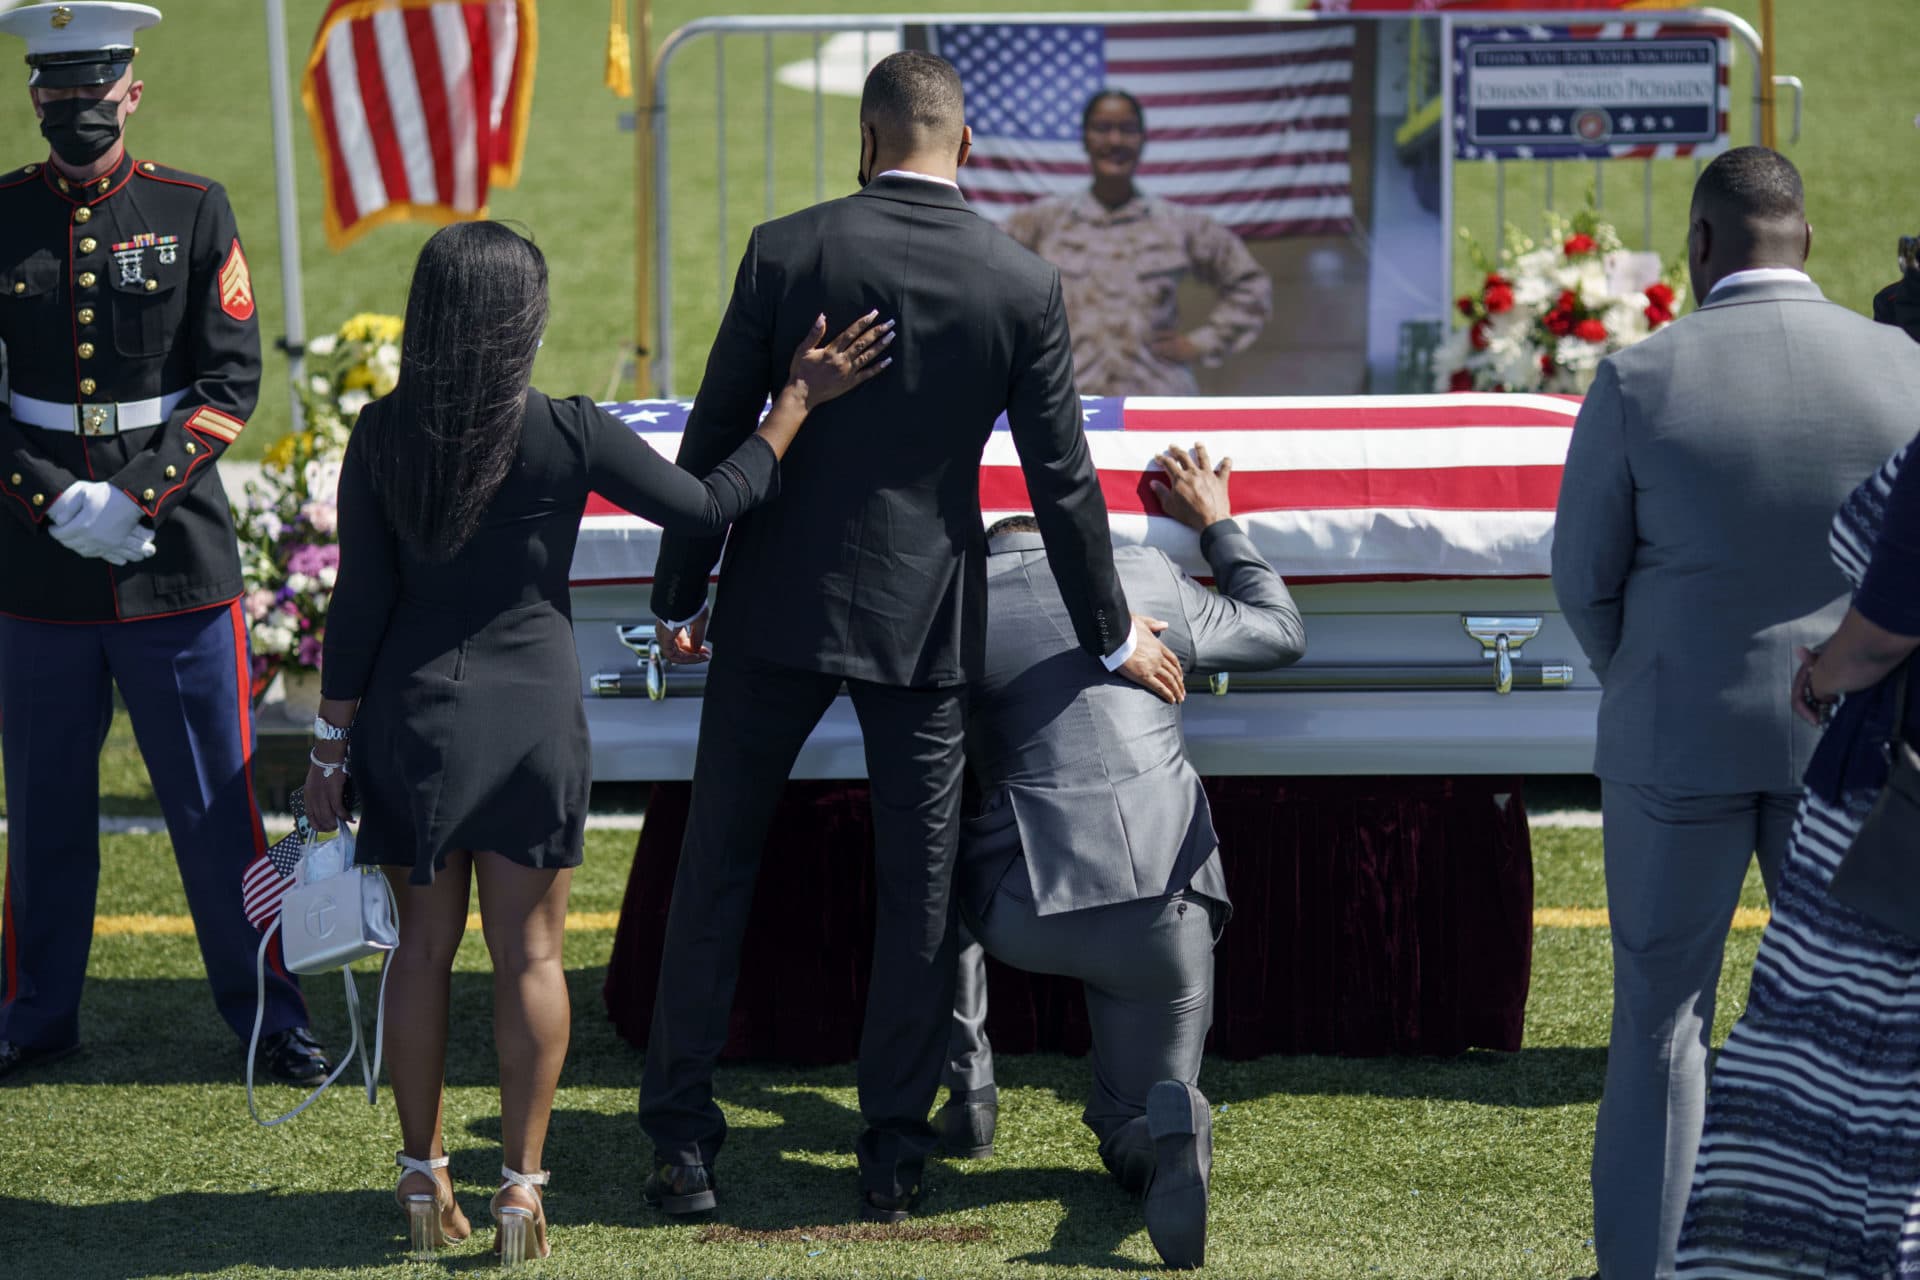 Mourners pay their respects to Sgt. Johanny Rosario. (David Goldman/AP)